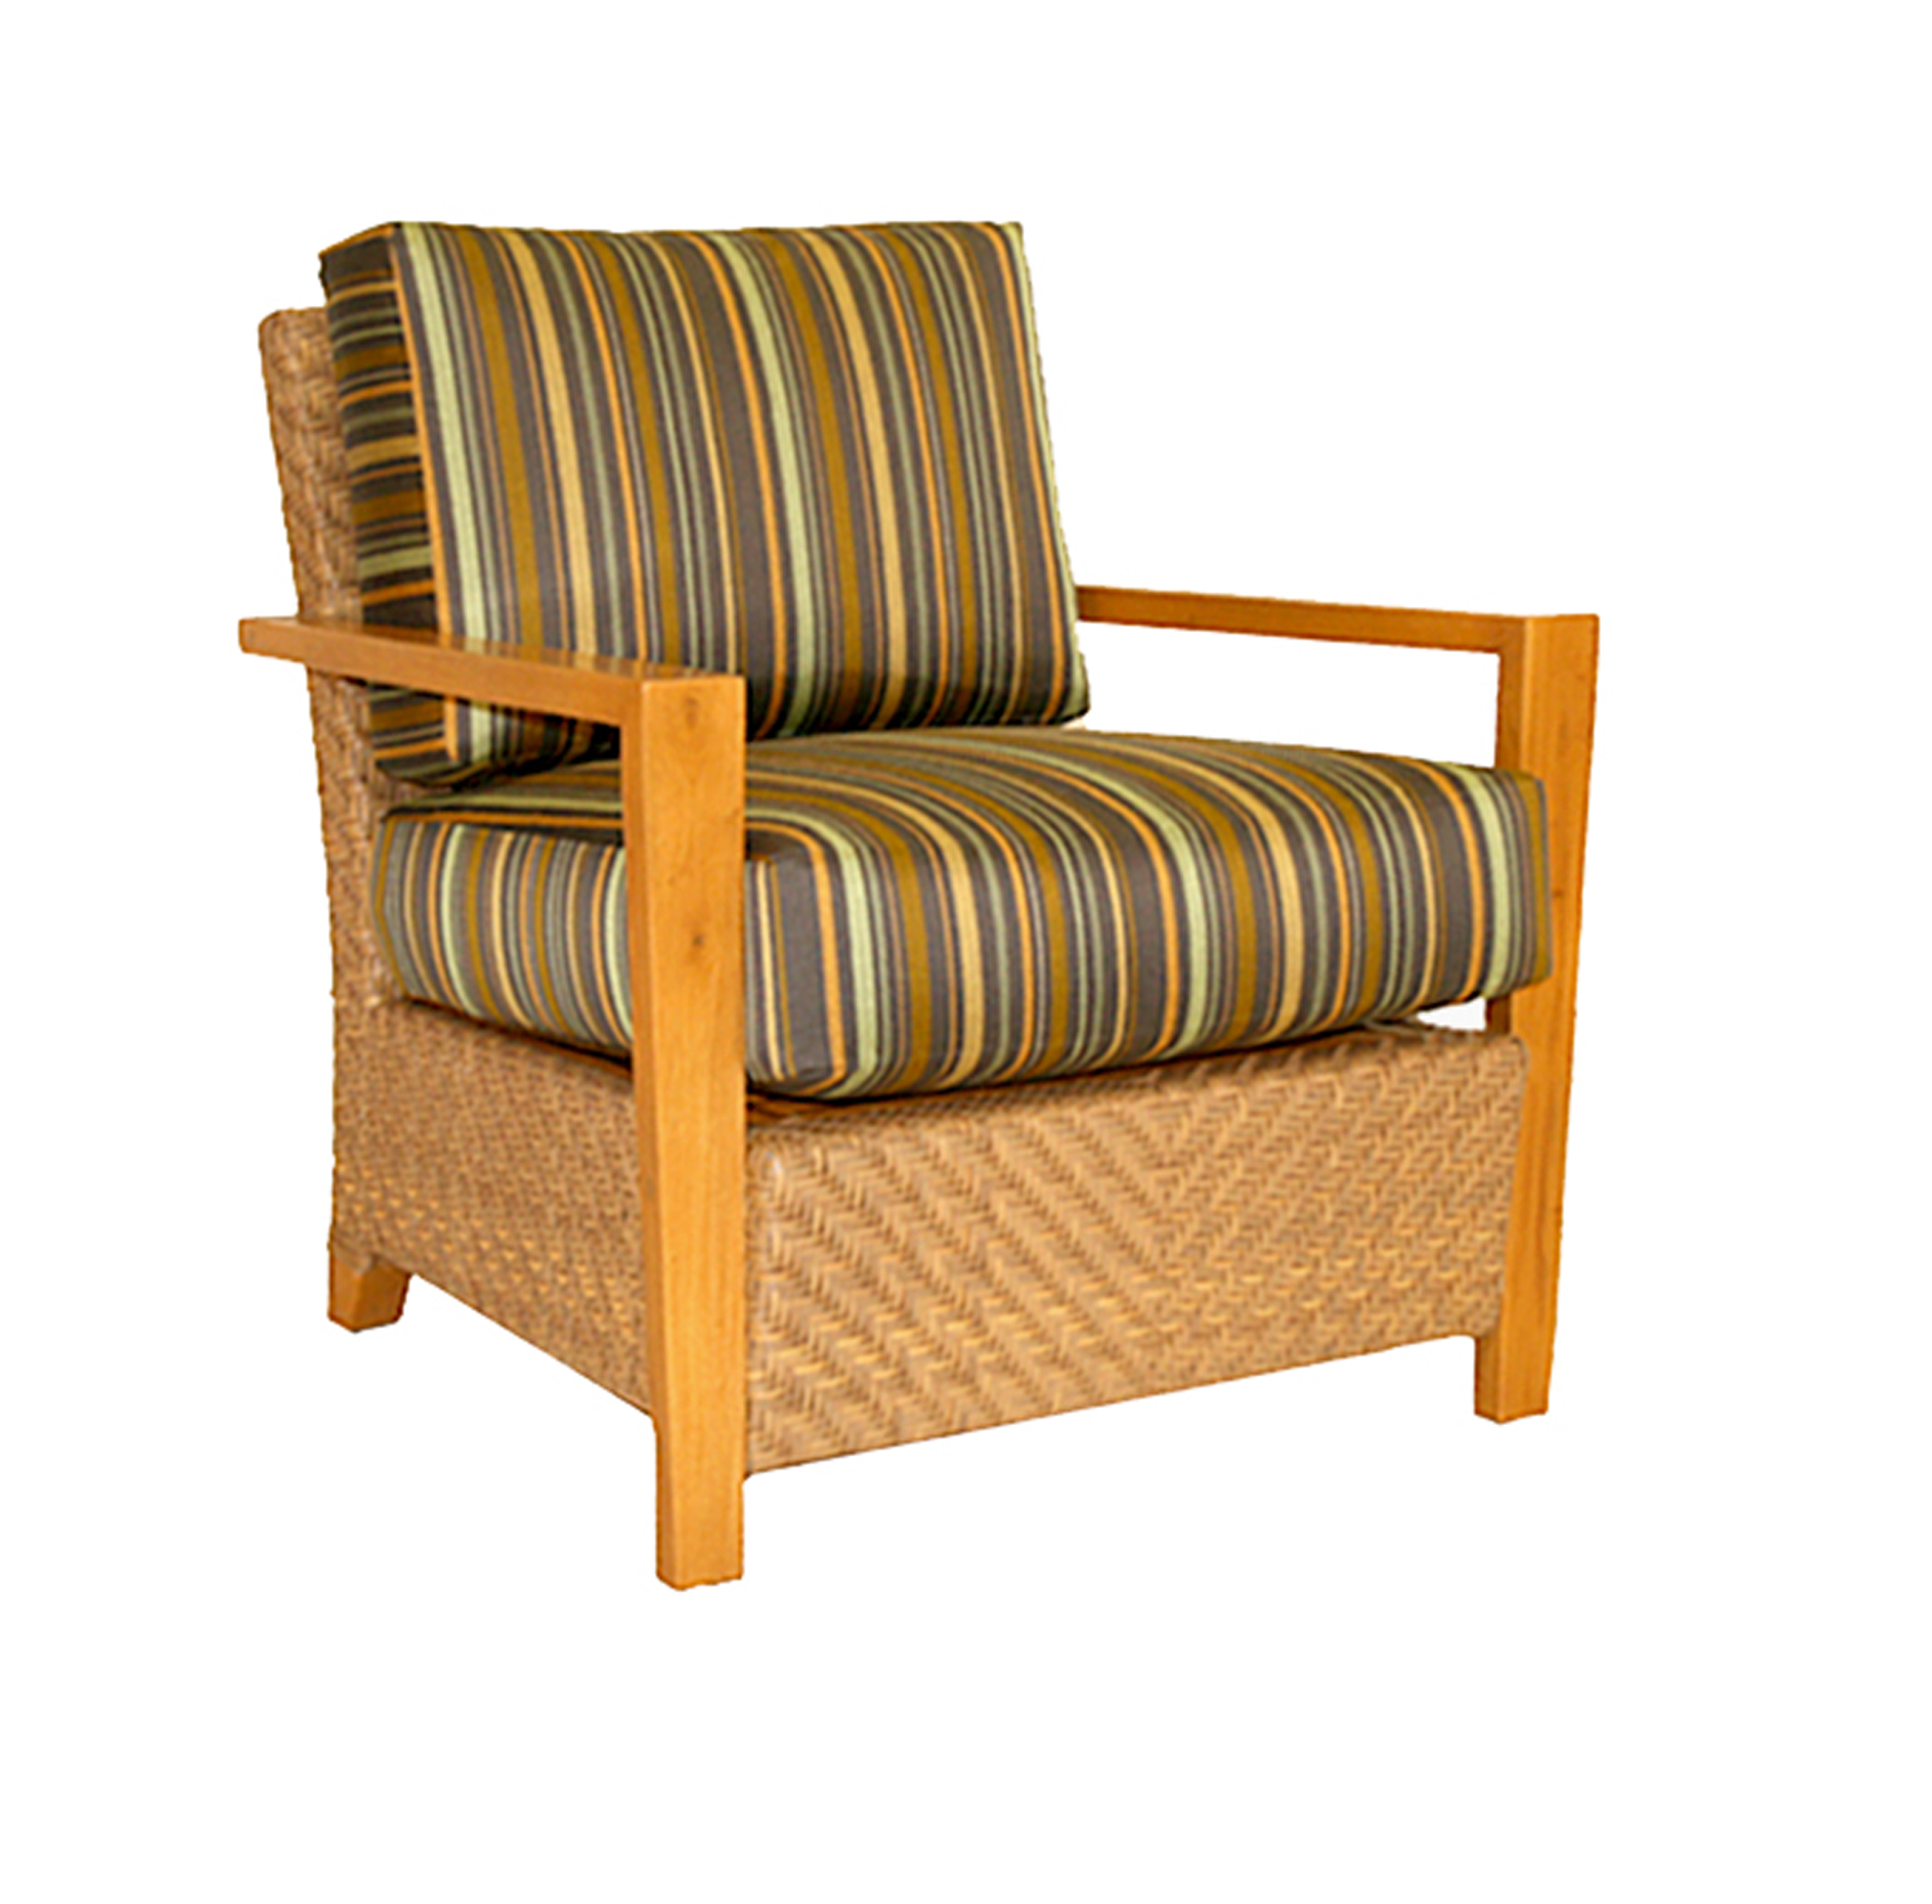 FB-5222 WOOD & RESIN CANE LOUNGE CHAIR